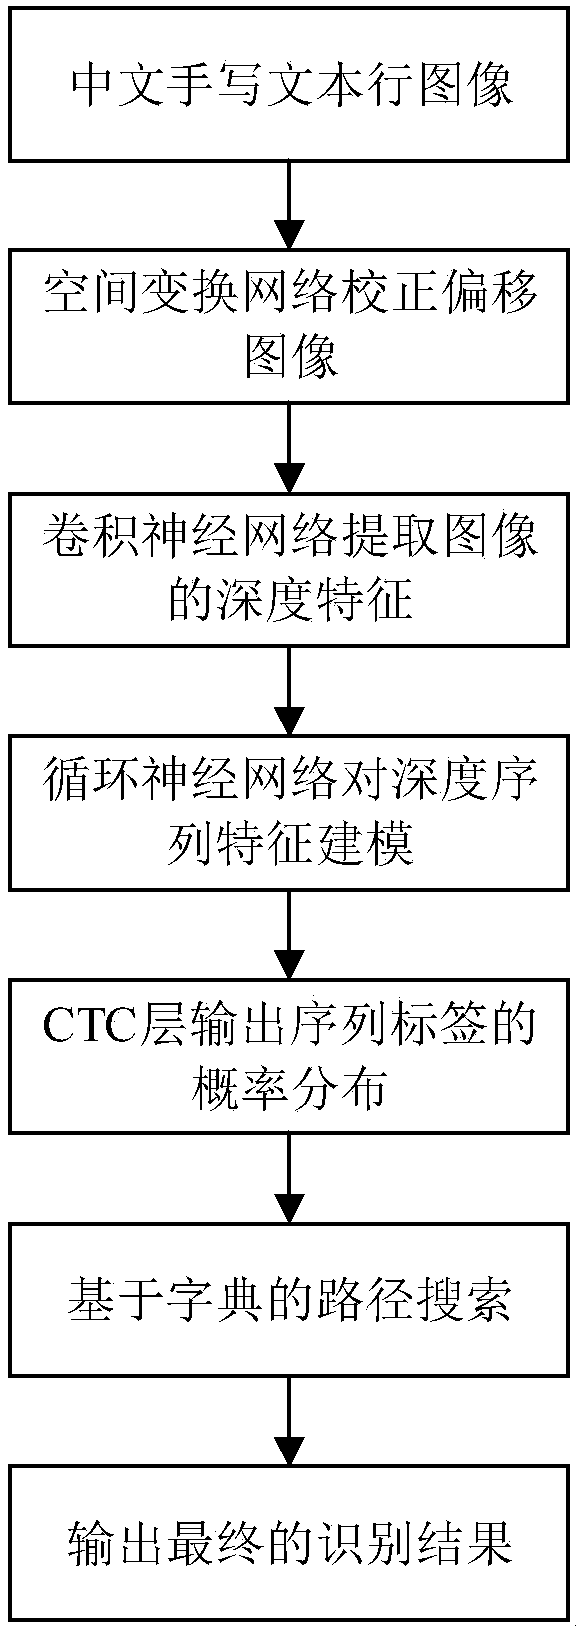 Segmentation-free off-line handwritten Chinese character text recognition method